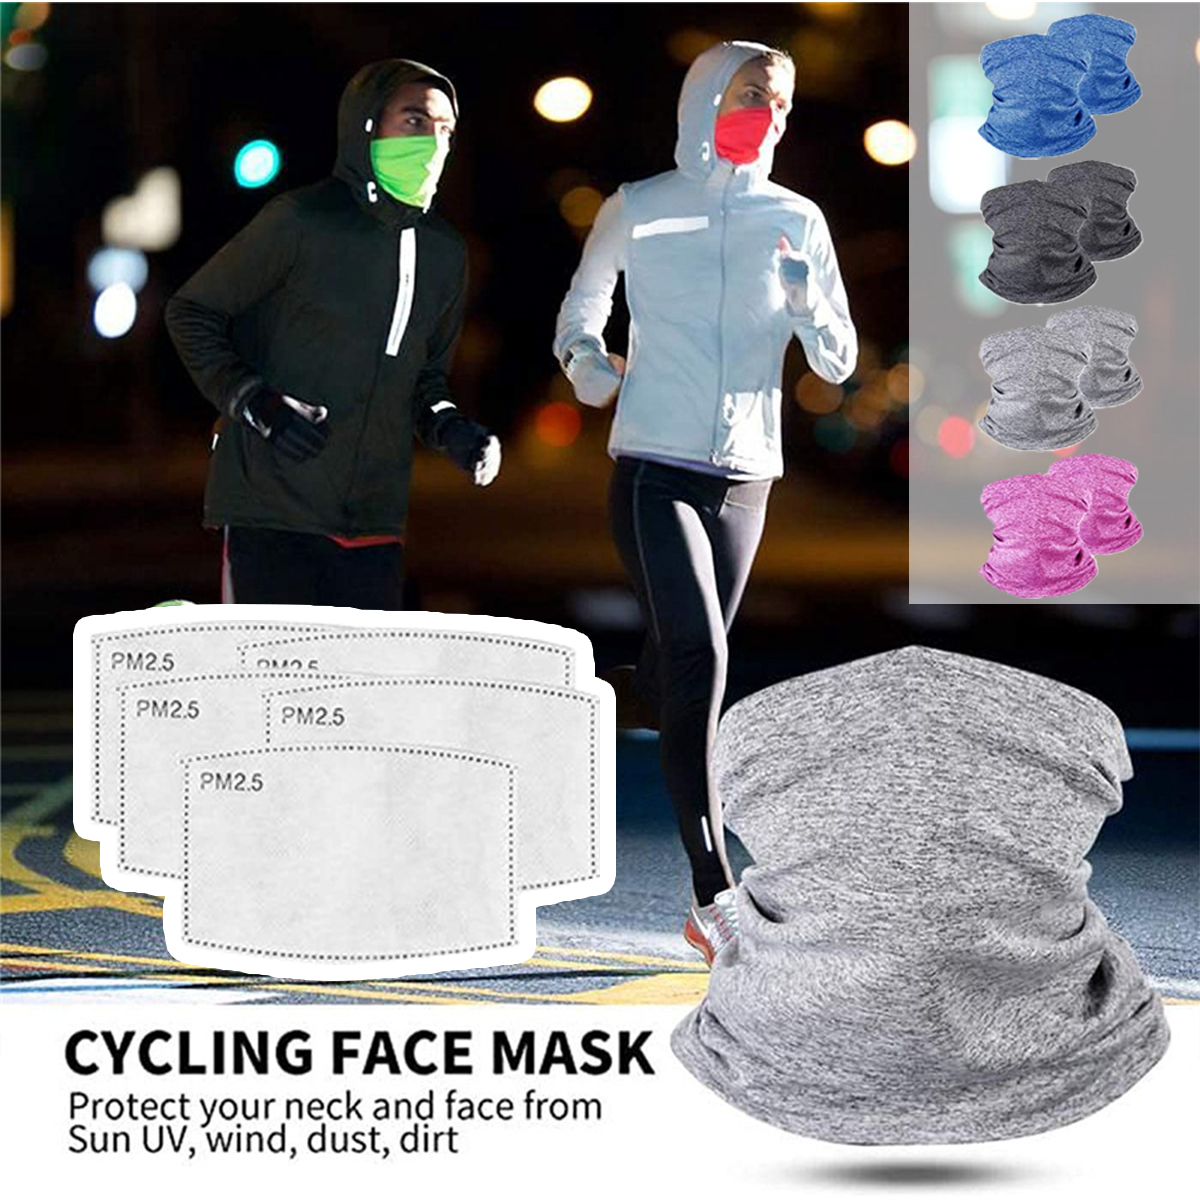 Outdoor-Dustproof-Breathable-Sport-Head-Scarves-Face-Mask-With-5-Filter-Pads-Windproof-PM25-Sunscree-1683314-2